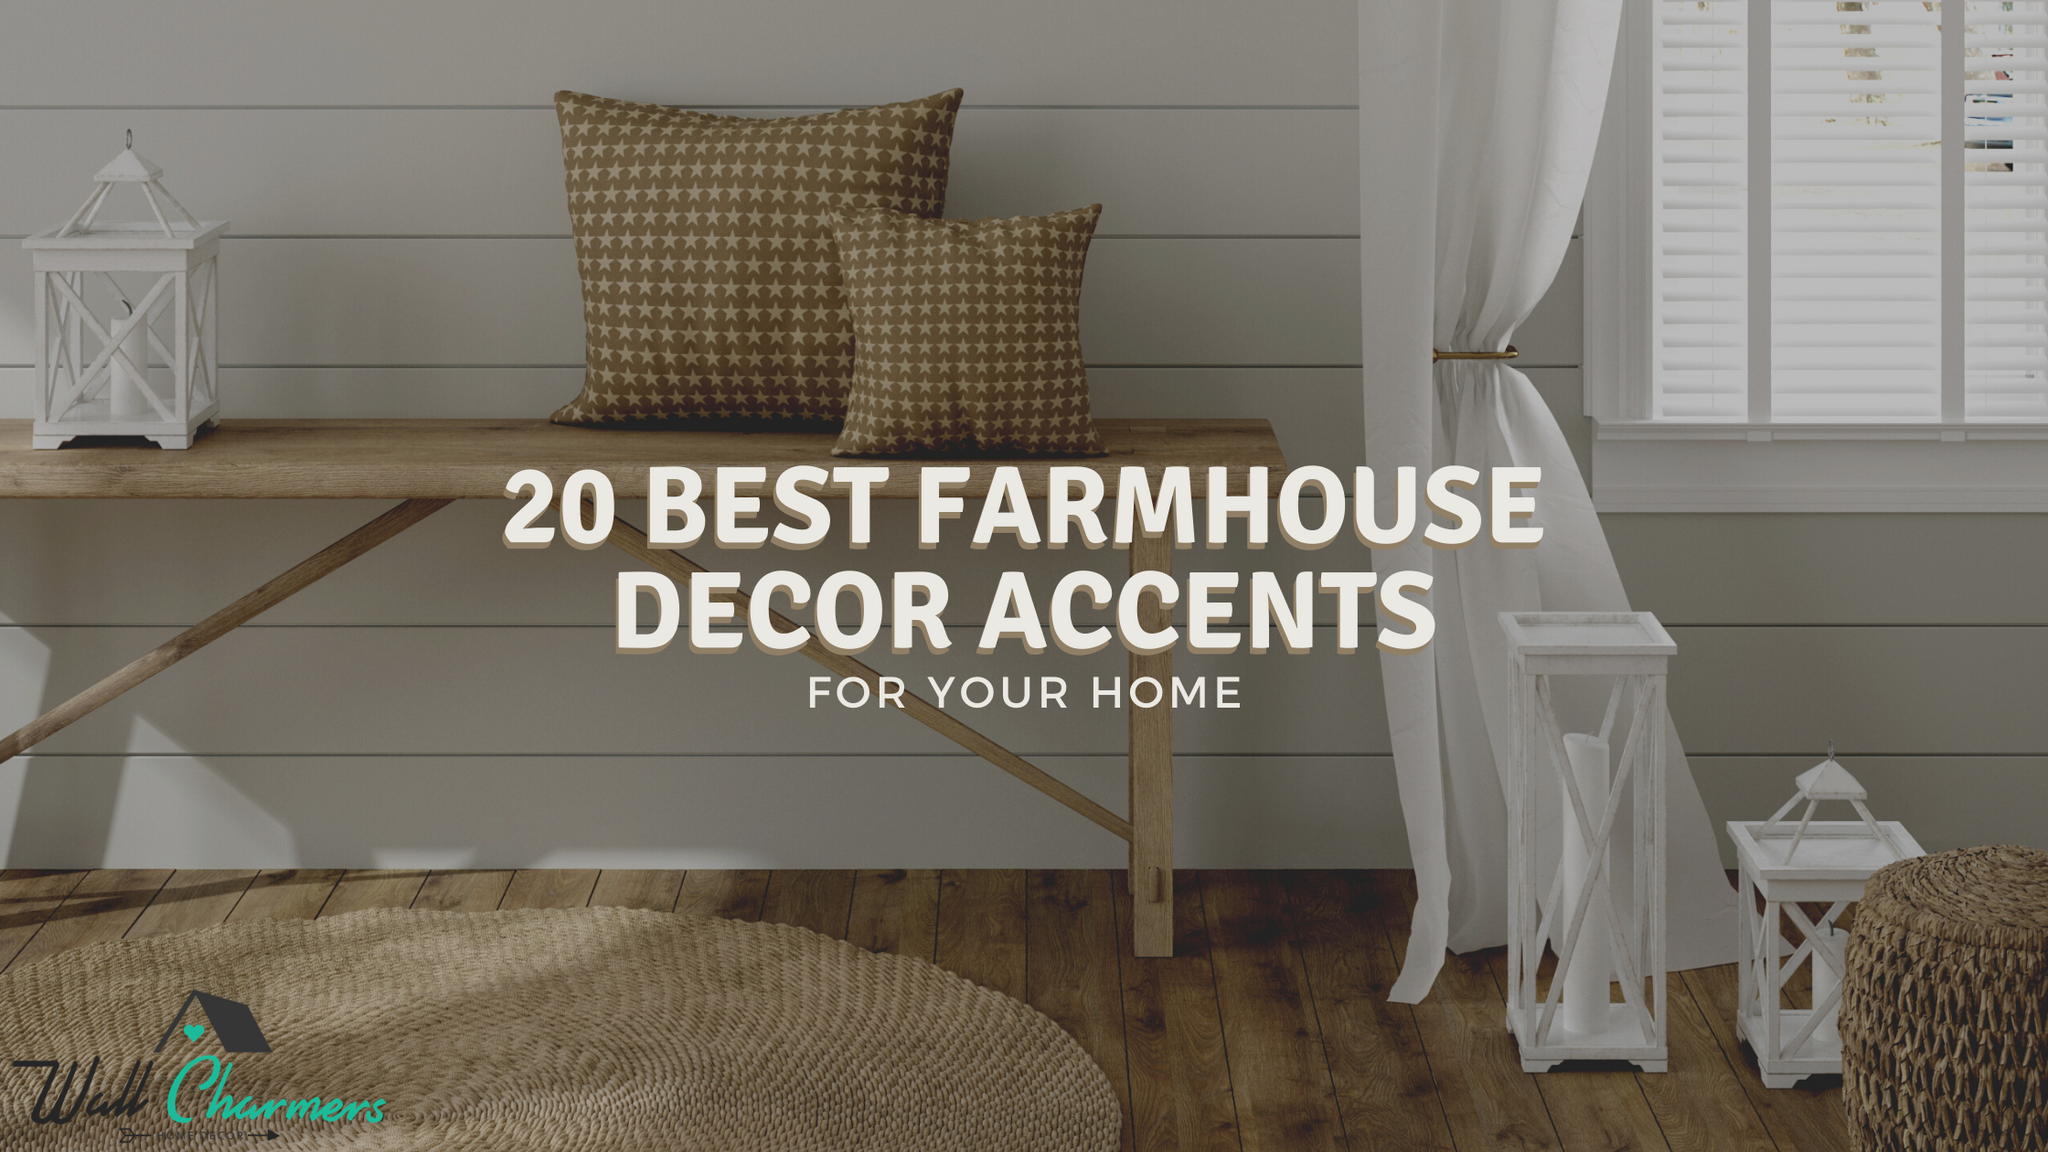 20 Best Farmhouse Decor Accents for your Home